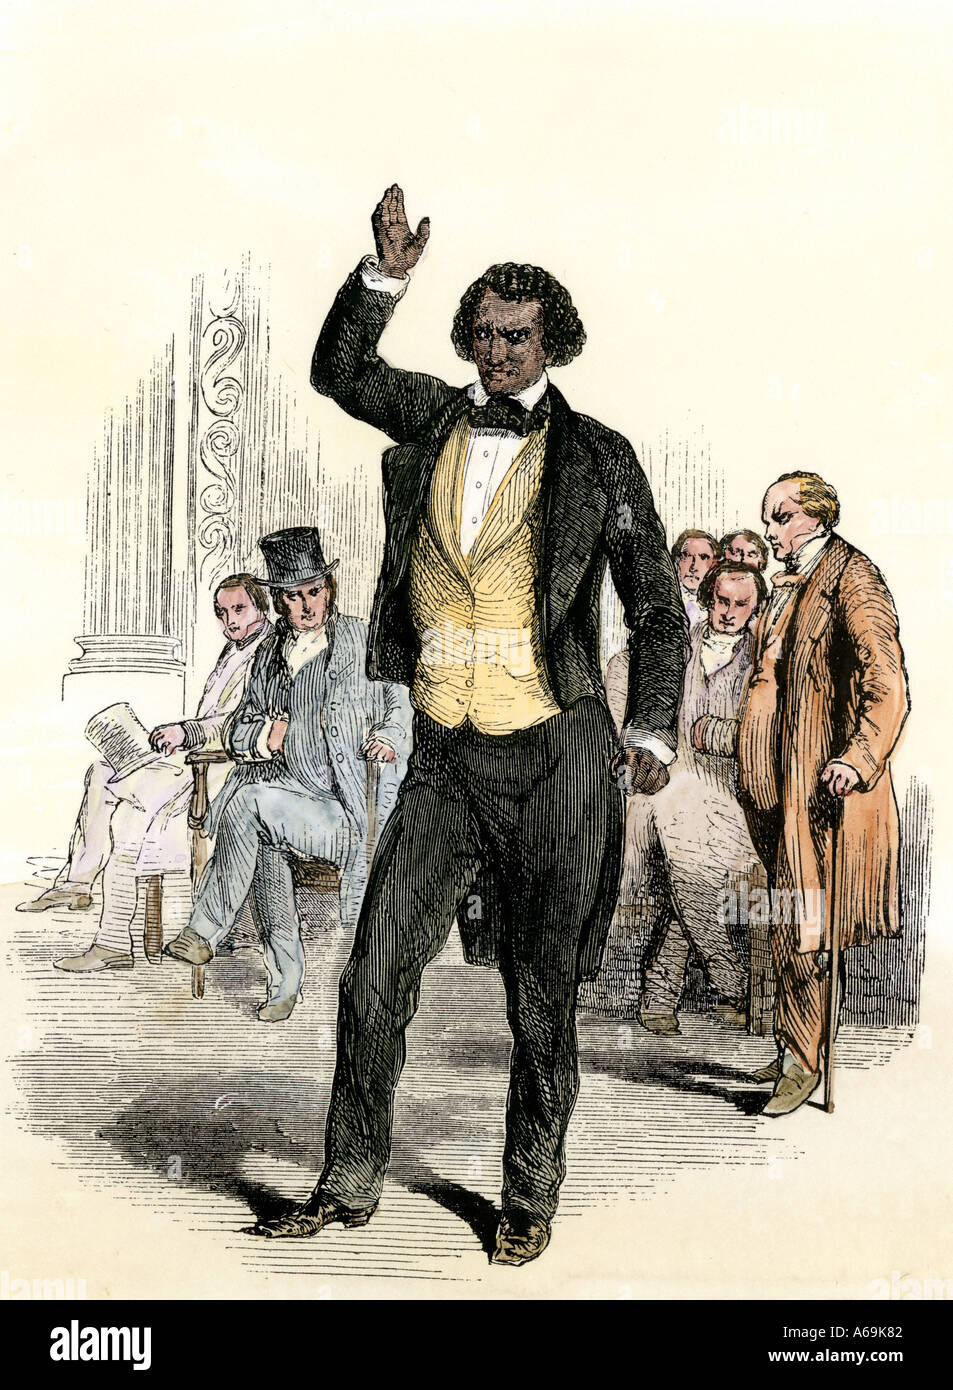 Frederick Douglass speaking in England on his experiences as a slave in the USA 1850s. Hand-colored woodcut Stock Photo